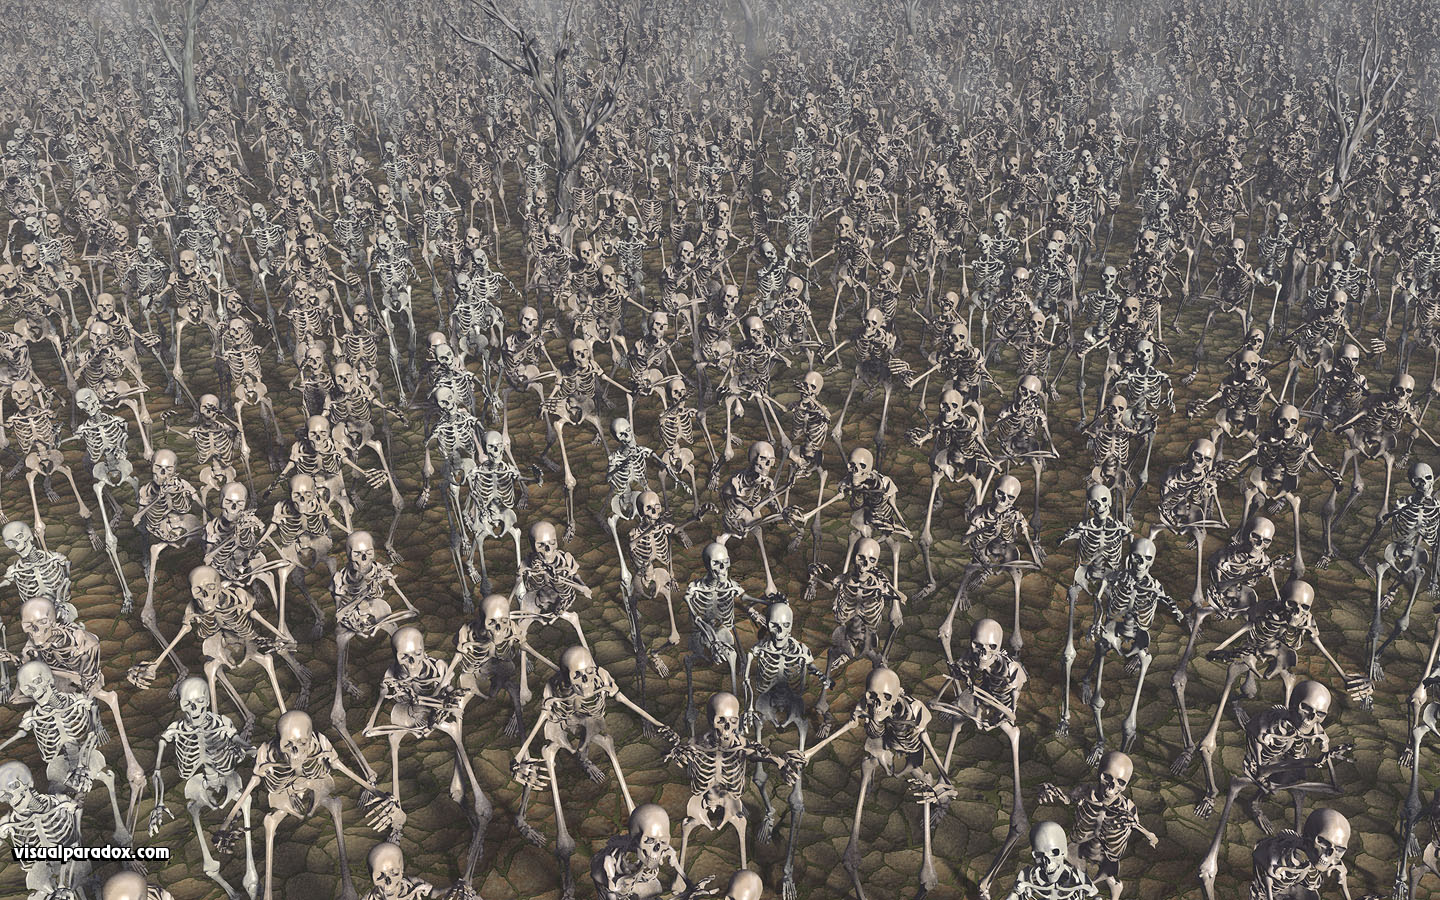 Skeletons, march, zombie, bones, skull, army, marching, crowd, chase, zombies, skeleton, attack, 3d, wallpaper, widescreen